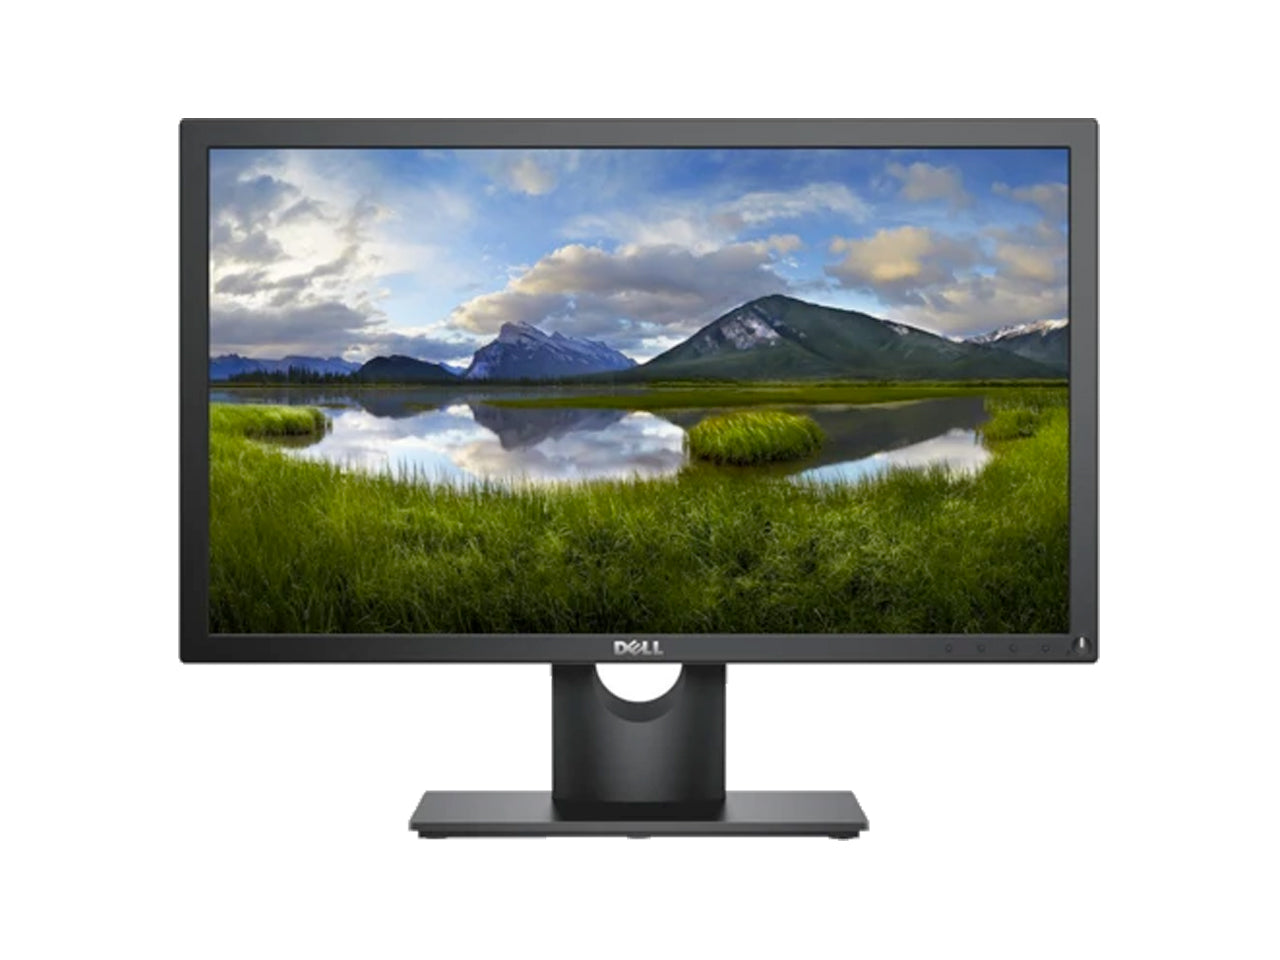 DELL E2219HN 22" (INCHES) LED MONITOR IPS